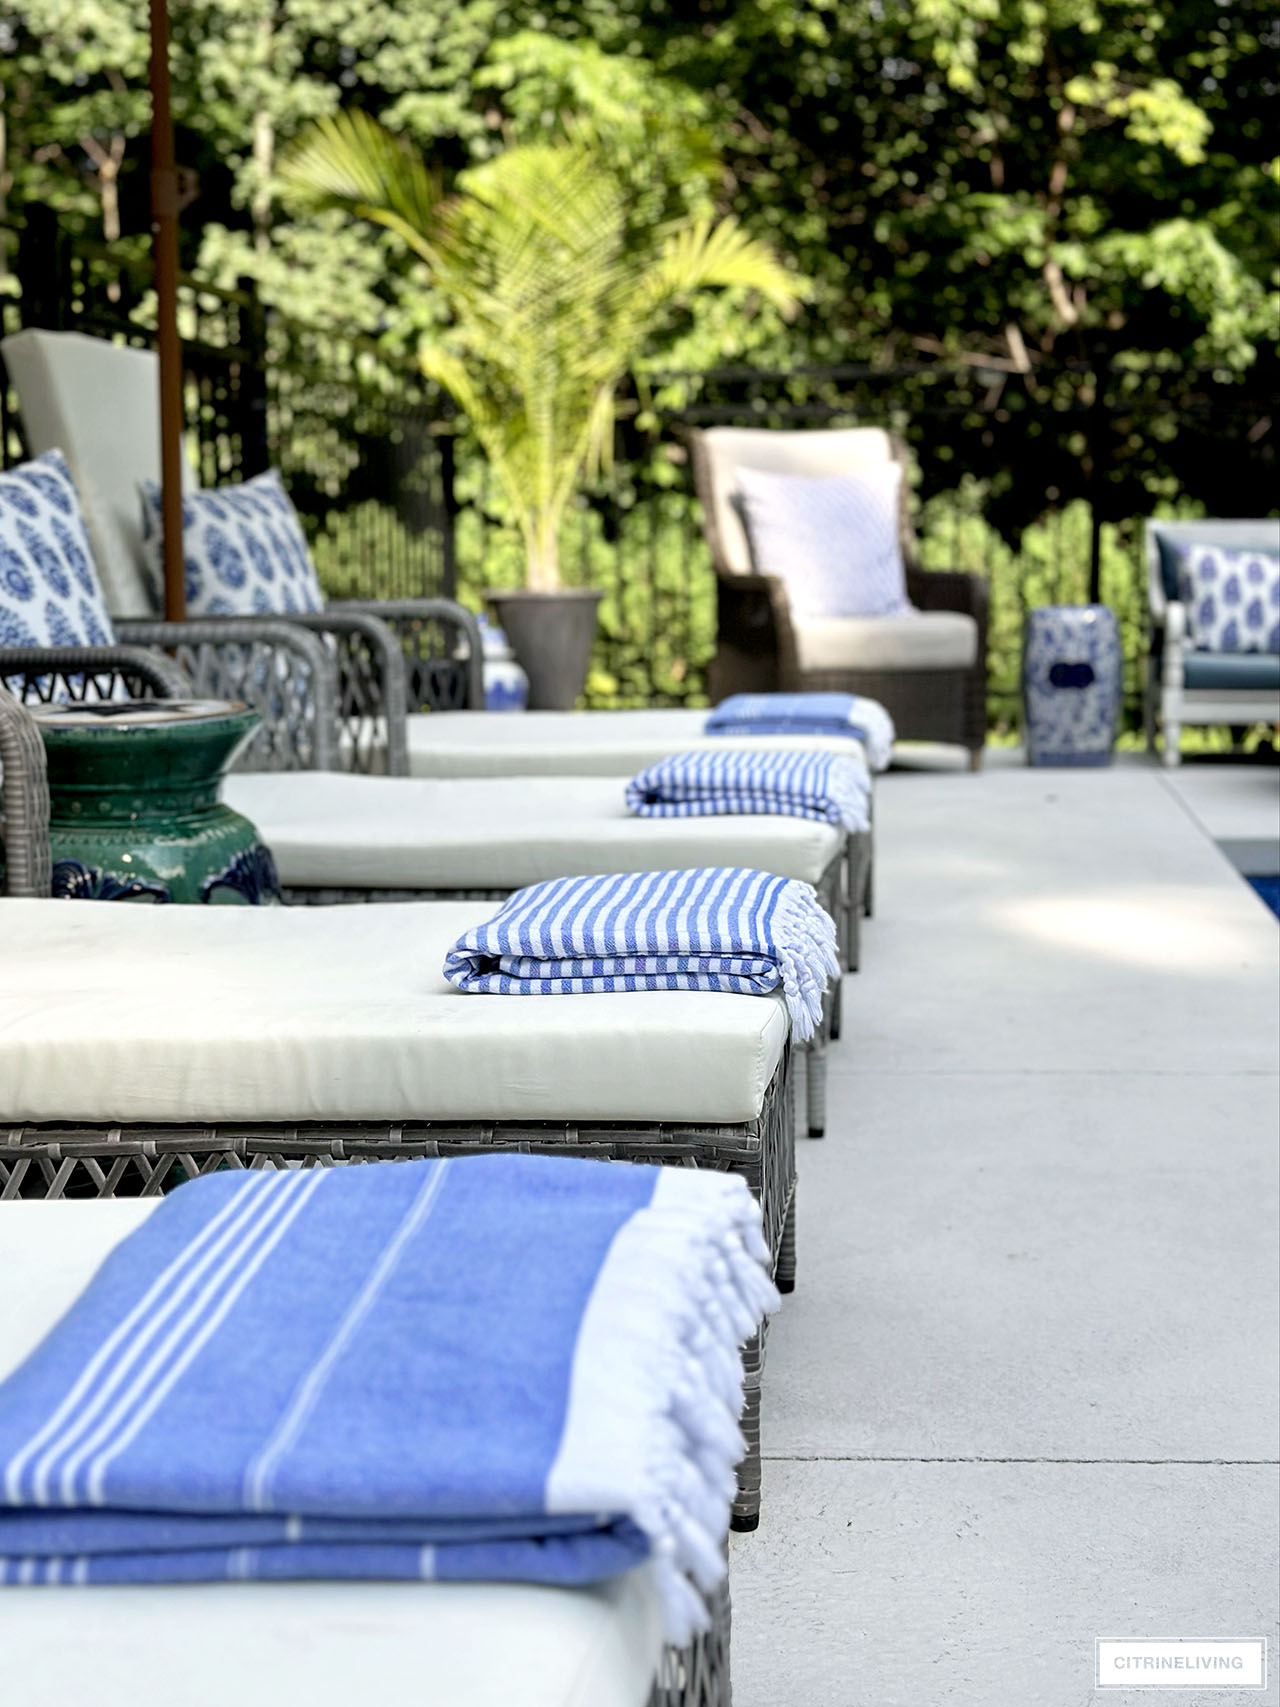 Striped towels styled on pool loungers.